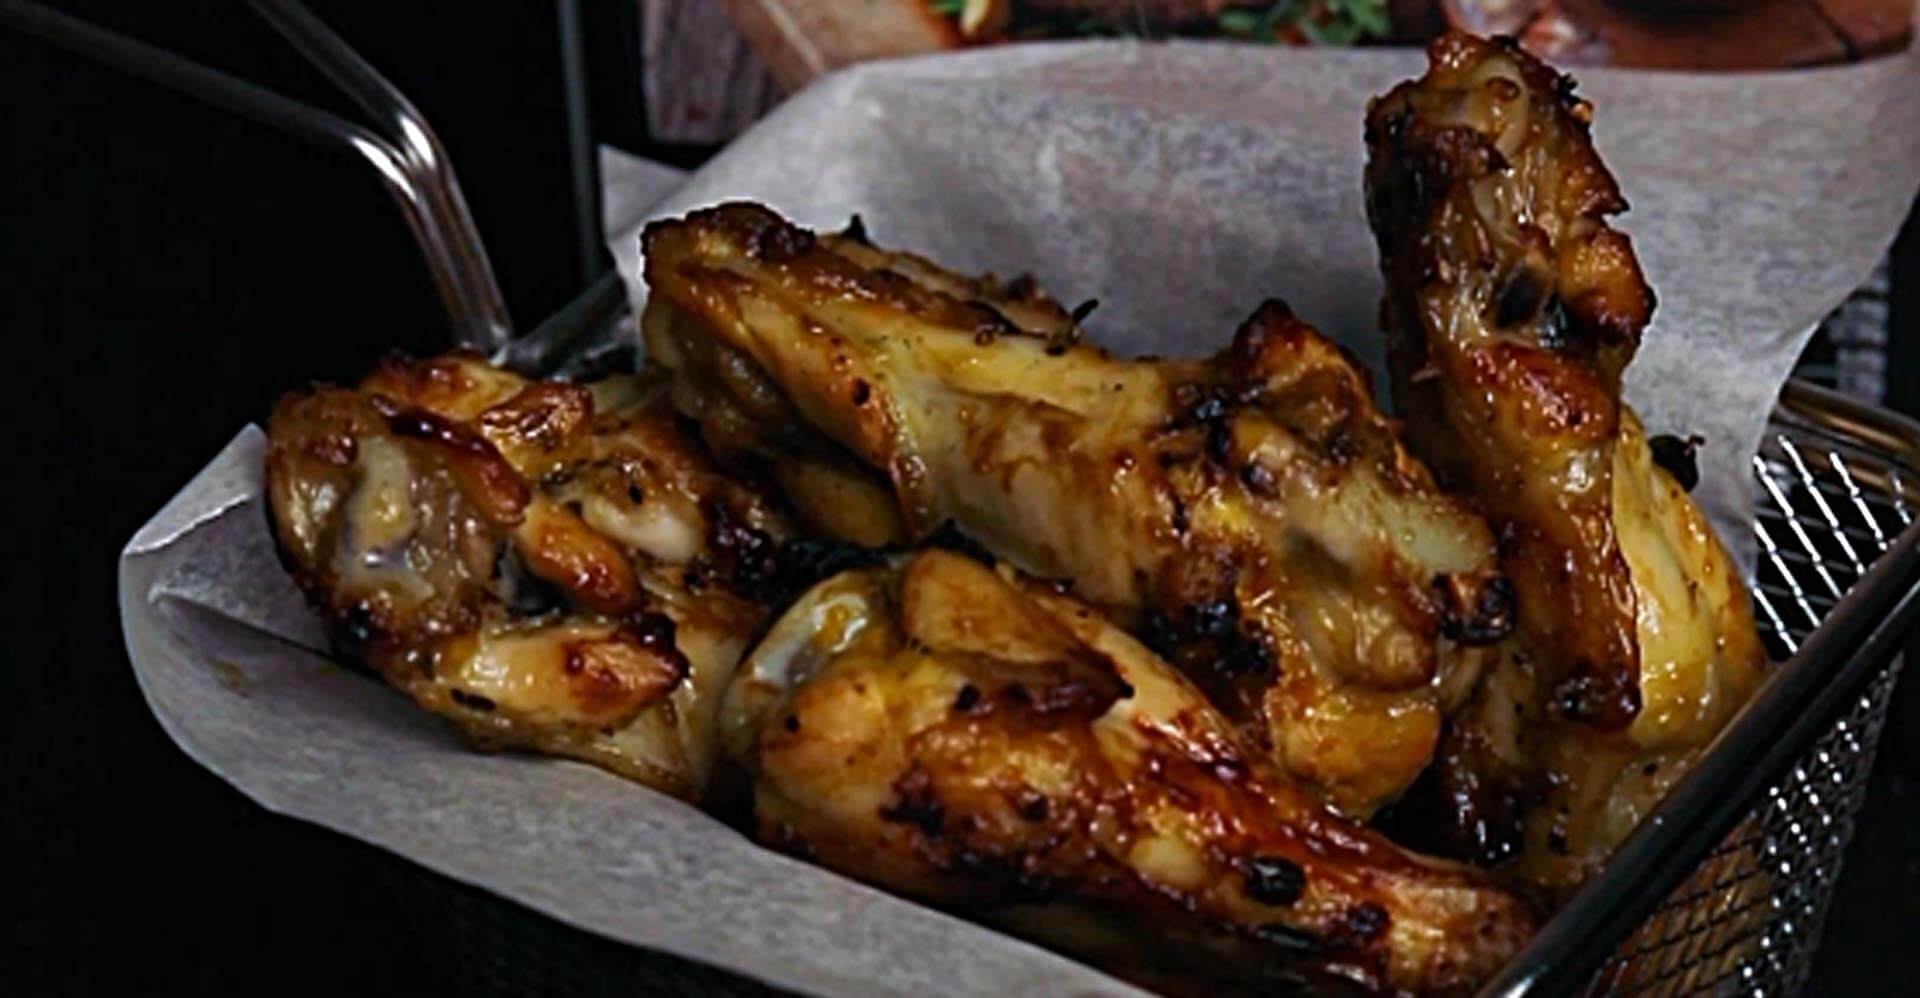 Chicken wings with Golden Barbeque Sauce